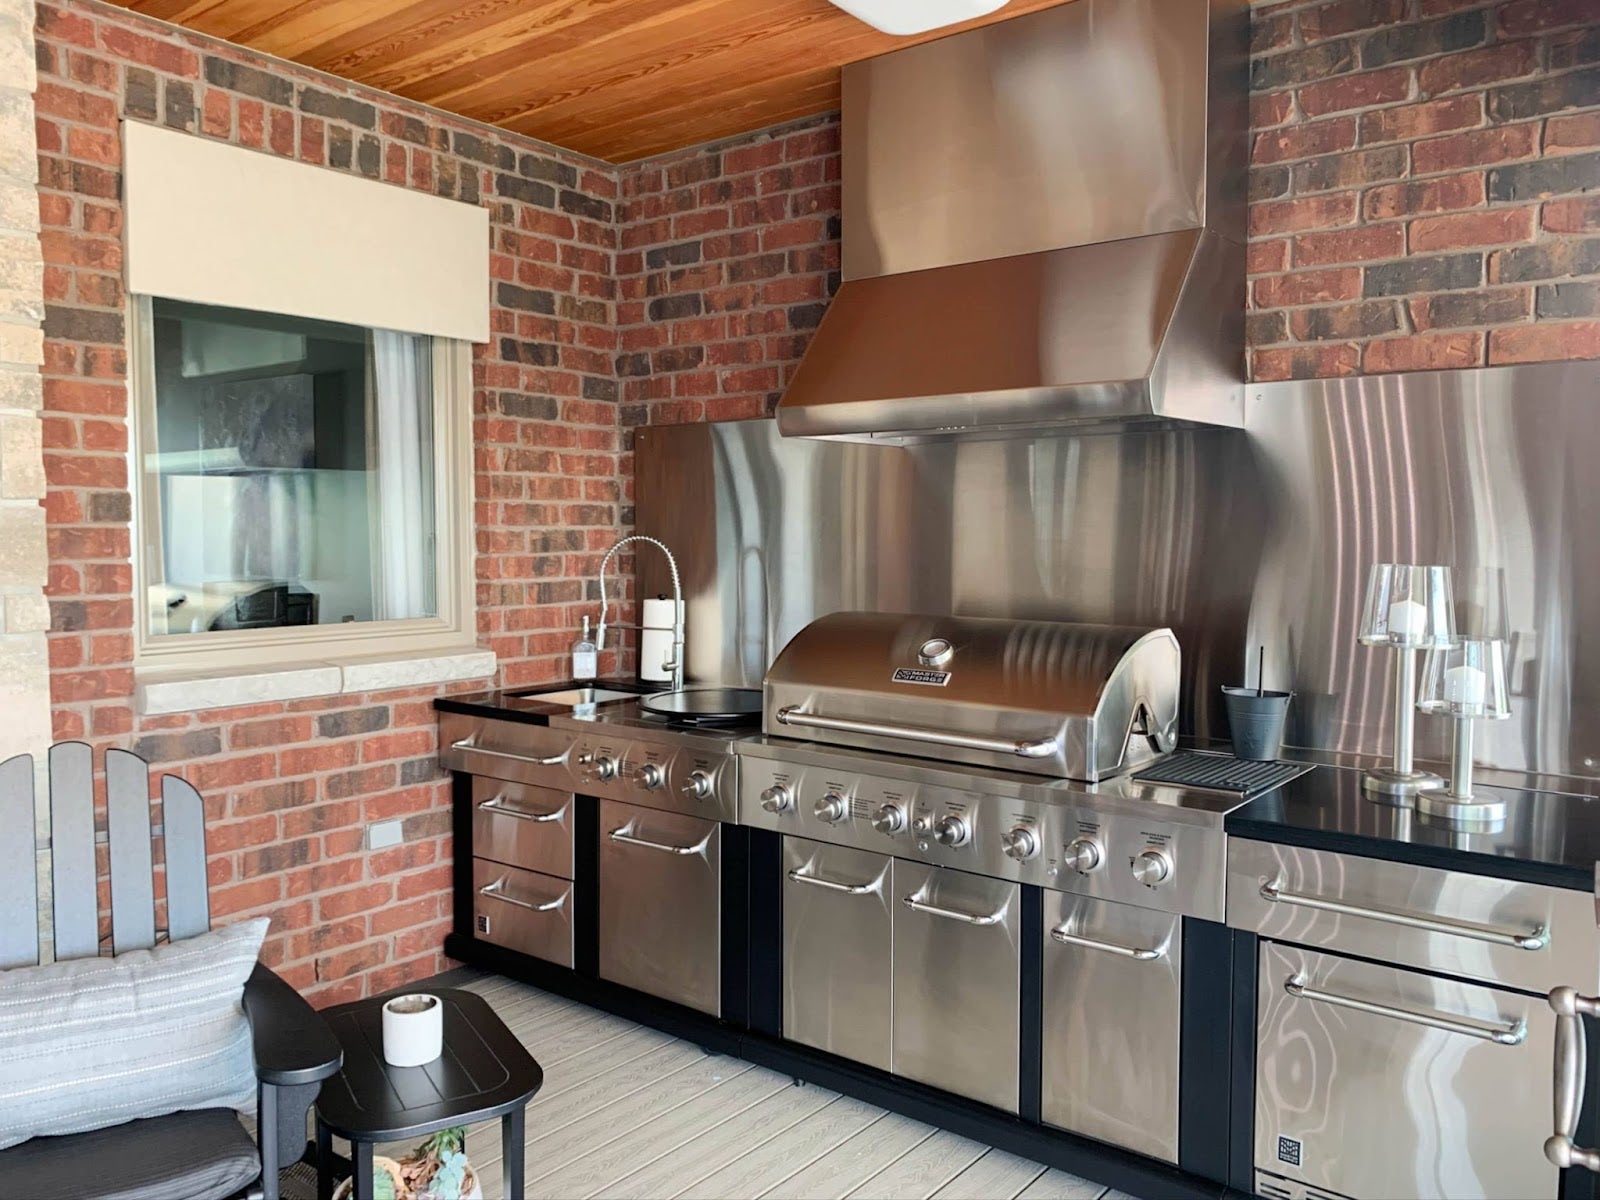 Industrial-style indoor kitchen with a Proline range hood, stainless steel appliances, and exposed brick walls, creating a harmonious blend of modern and rustic elements - prolinerangehoods.com